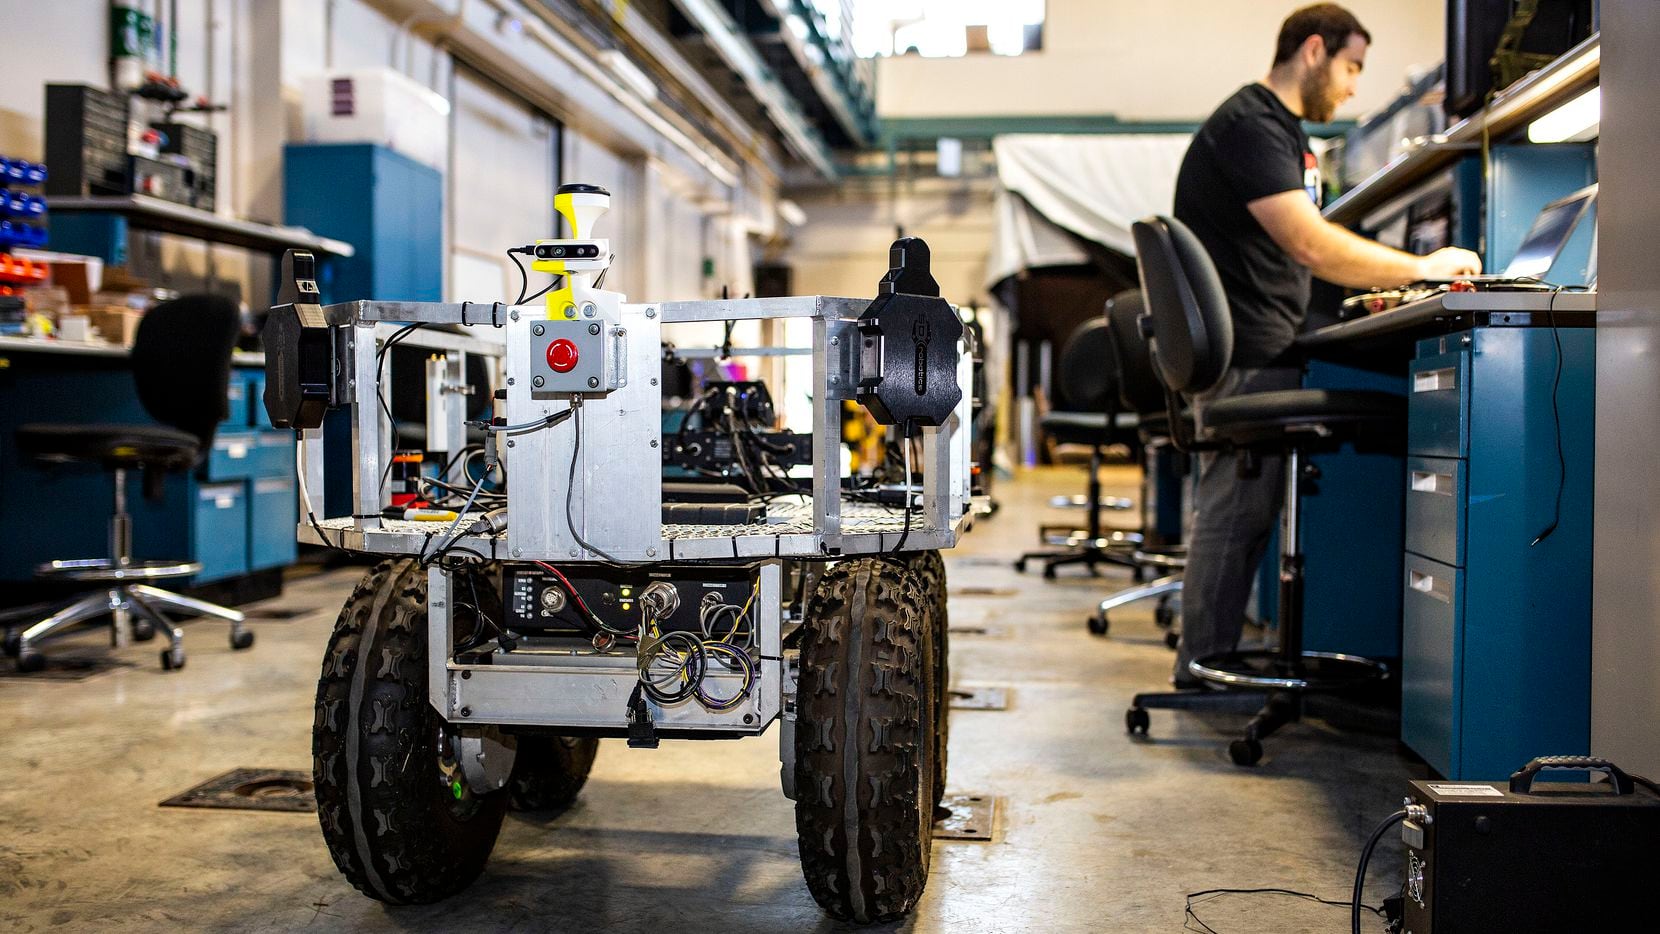 The U.S. Army Futures Command sent a vehicle to the Nuclear and Applied Robotics Group lab...